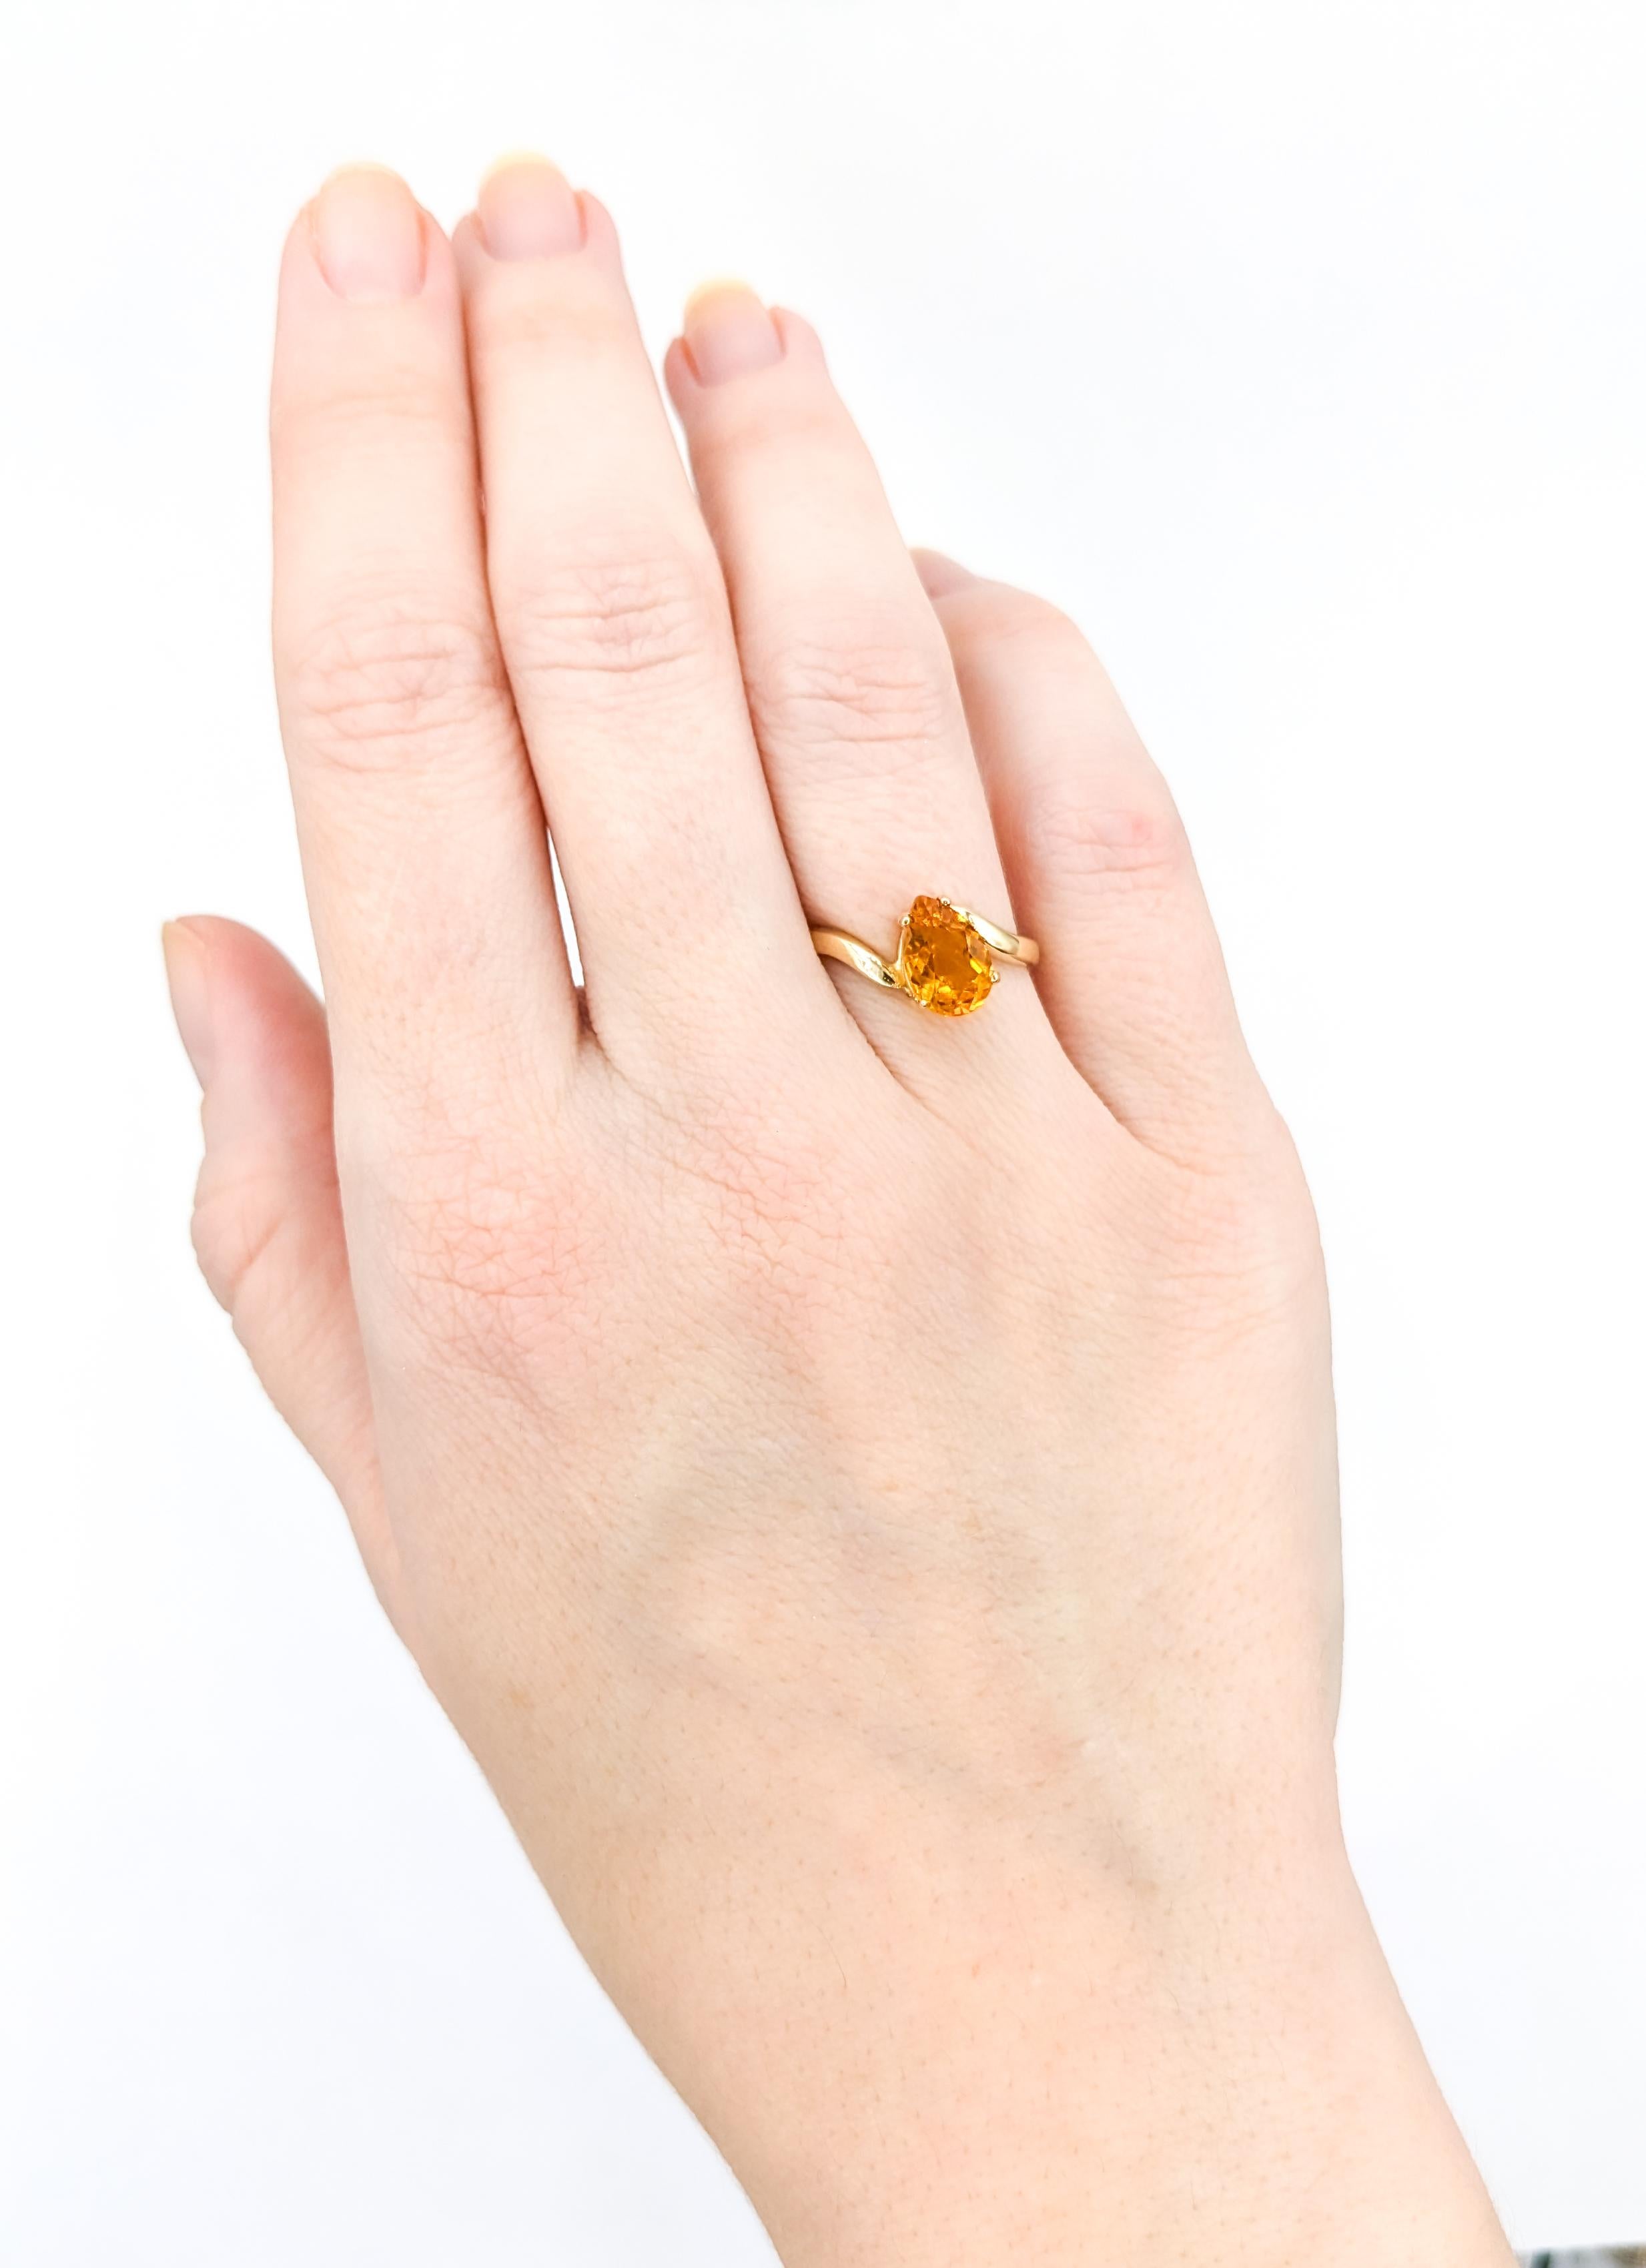 Pear-Cut Citrine Ring in Gold 

Introducing this cute citrine ring, crafted in 14K Yellow Gold. At its heart lies a stunning 9x6mm Pear Cut Citrine with a captivating orange color. The ring, presented in size 6, can be resized to your specifications